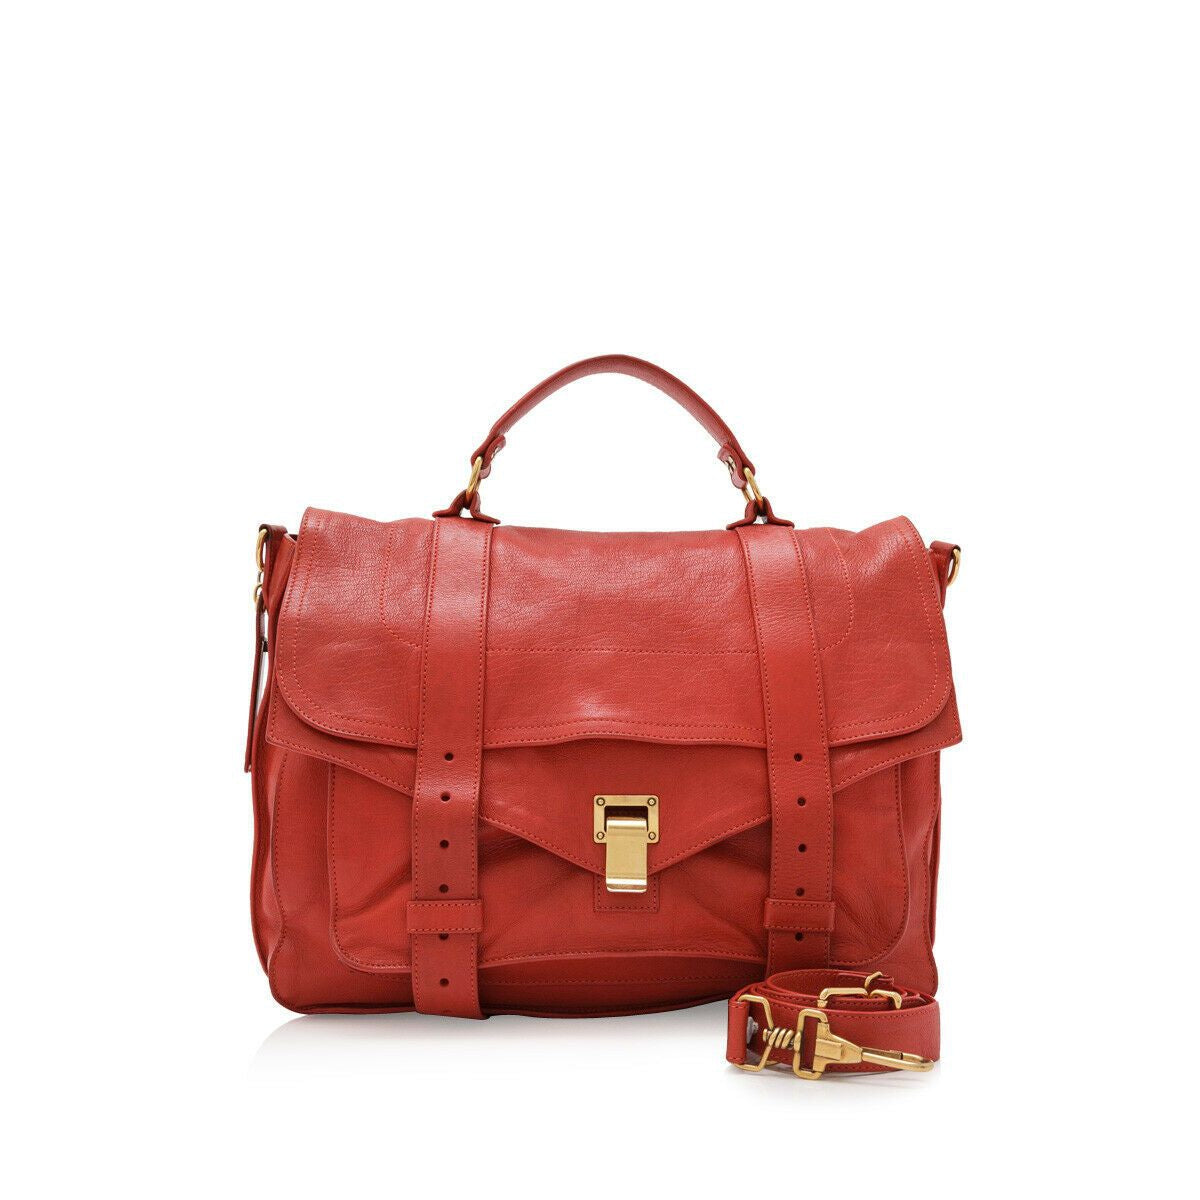 Proenza Schouler PS1 Large Leather Satchel Red